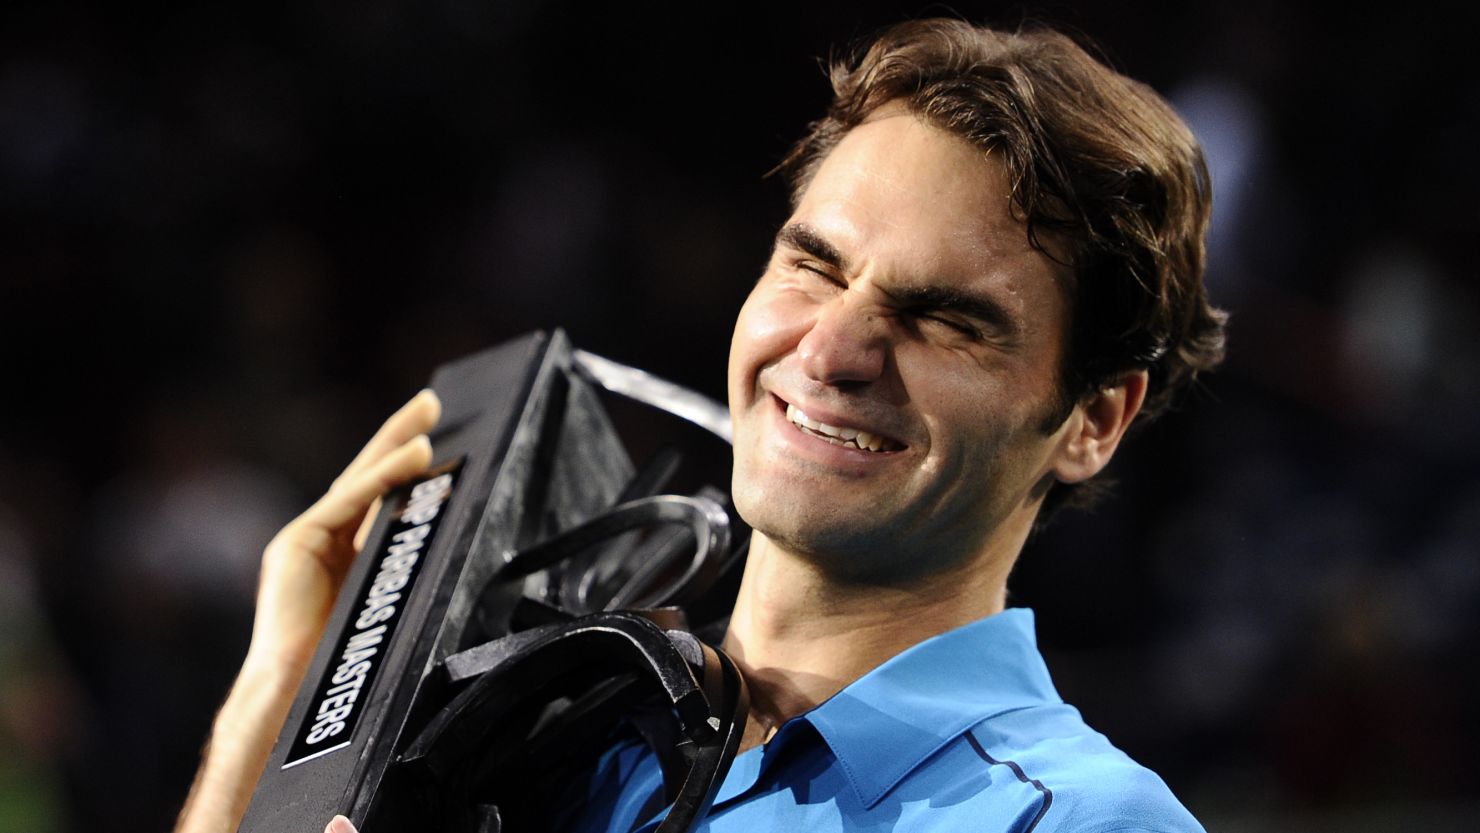 Roger Federer smiles as he lifts the Paris Masters trophy for the first time in his illustrious career.